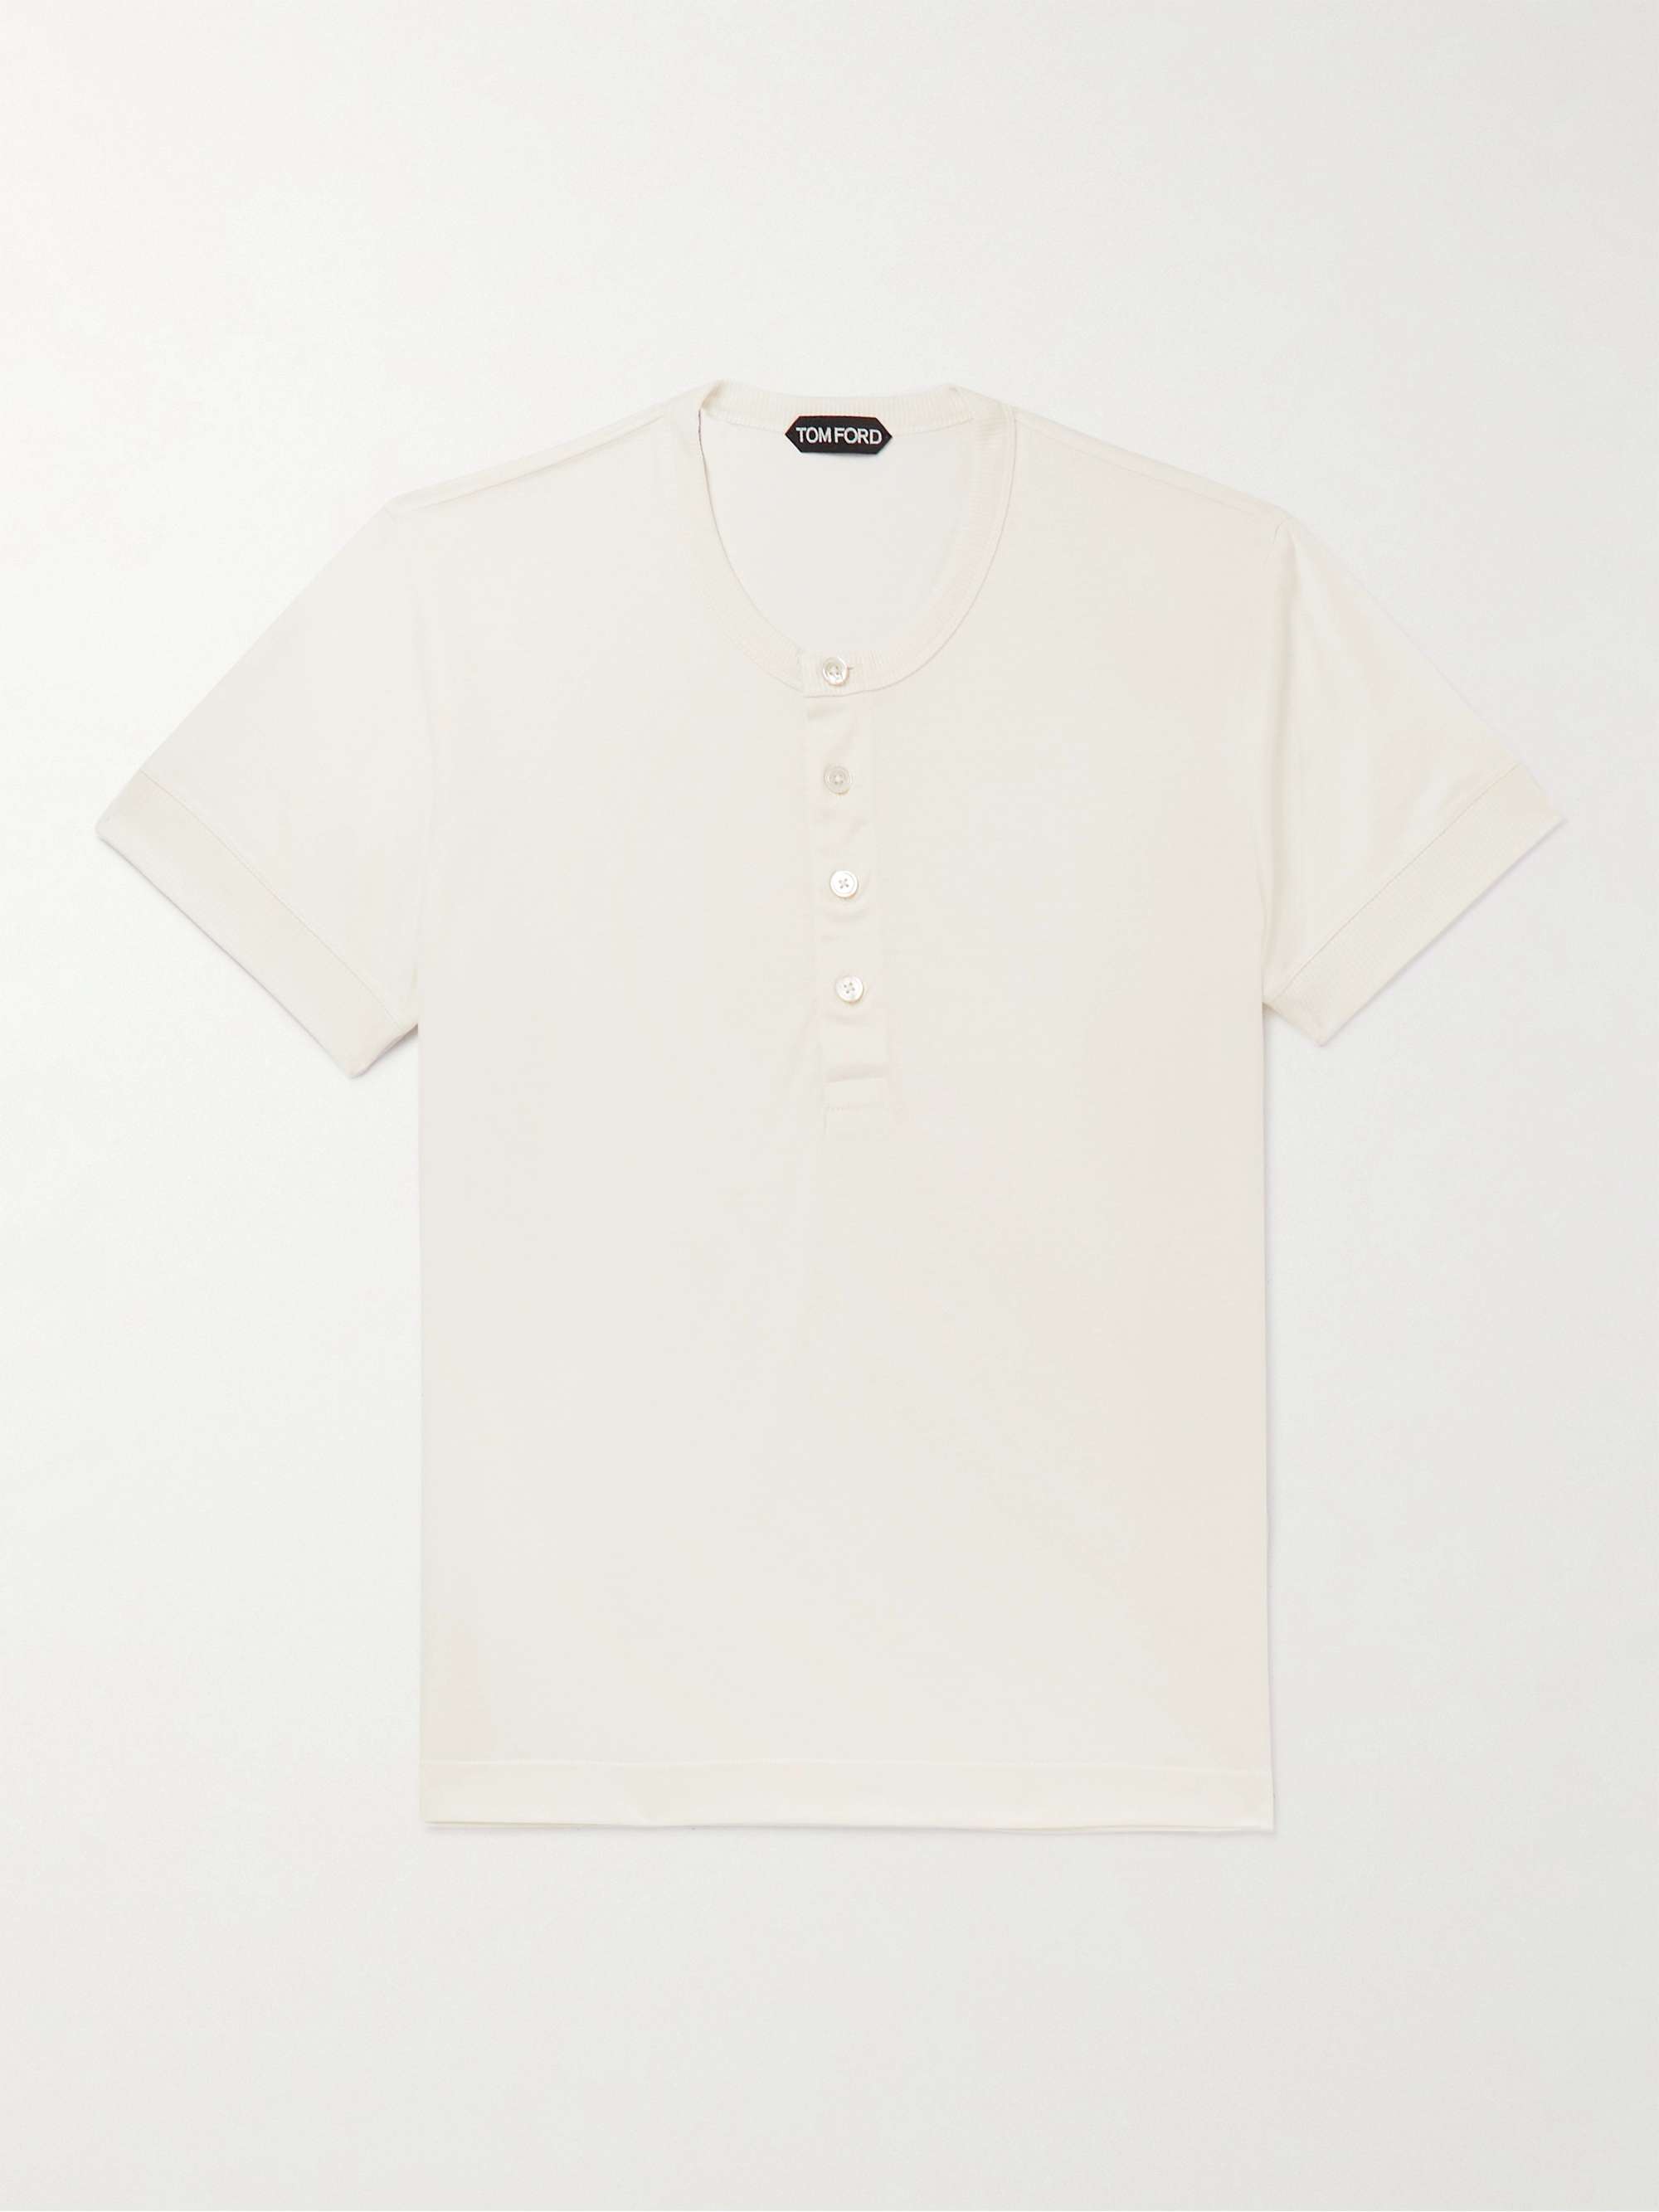 TOM FORD Silk and Cotton-Blend Jersey Henley T-Shirt for Men